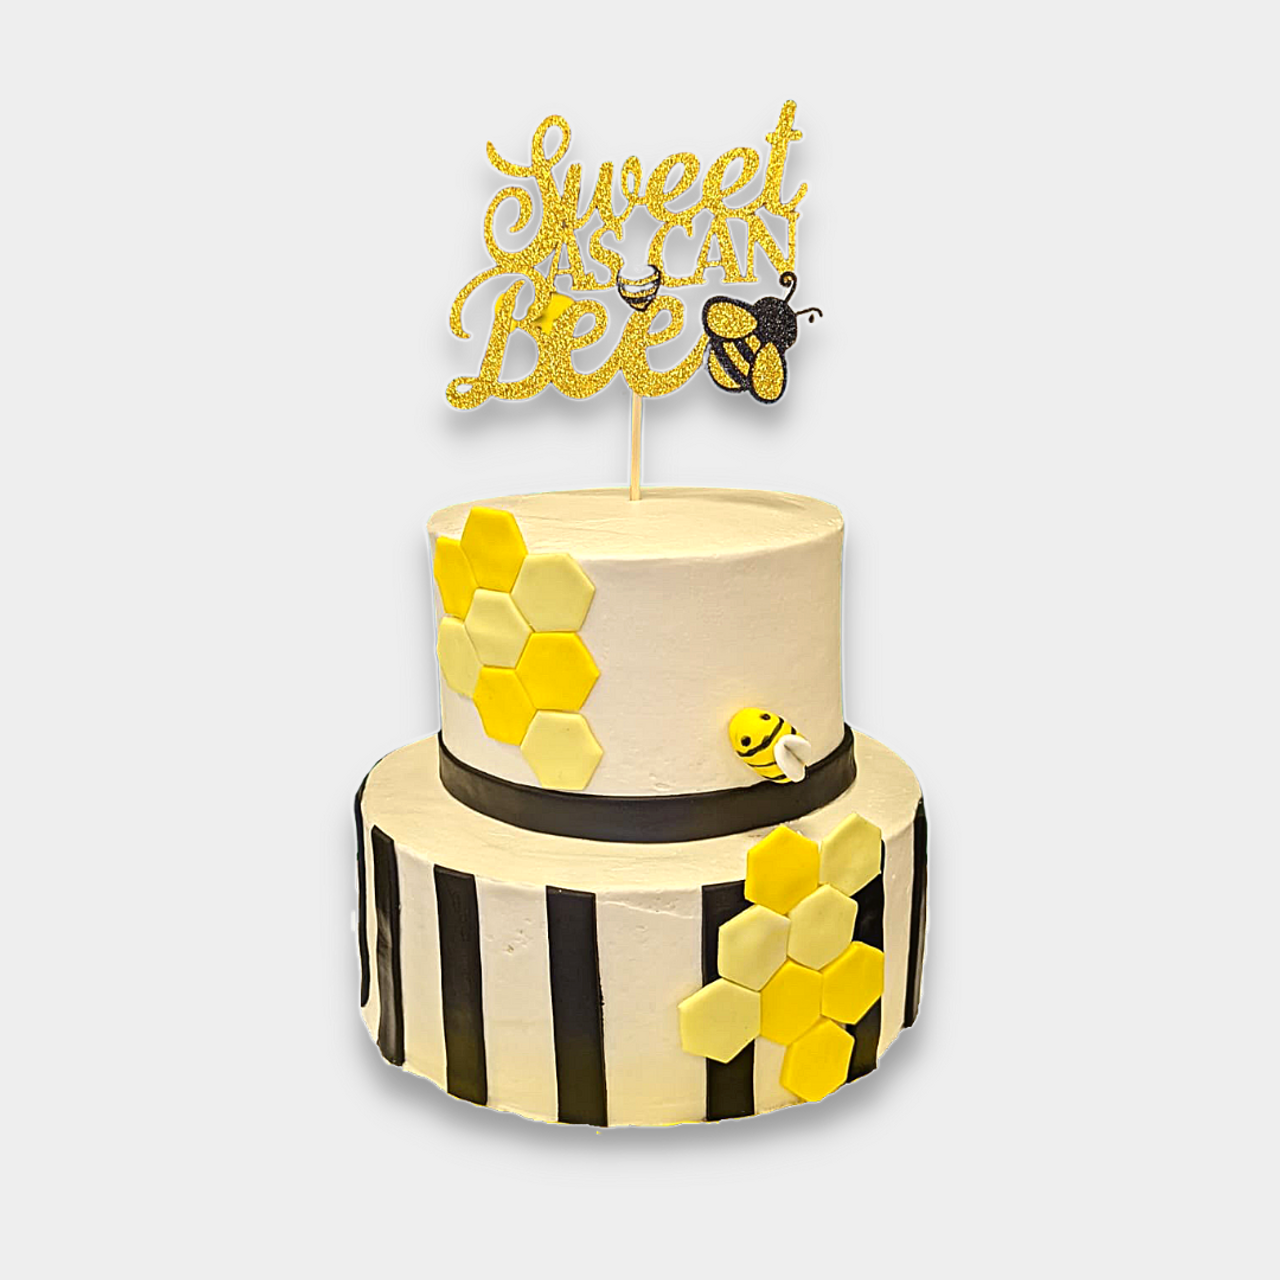 Twin Bees Theme Cake Delivery Chennai, Order Cake Online Chennai, Cake Home  Delivery, Send Cake as Gift by Dona Cakes World, Online Shopping India